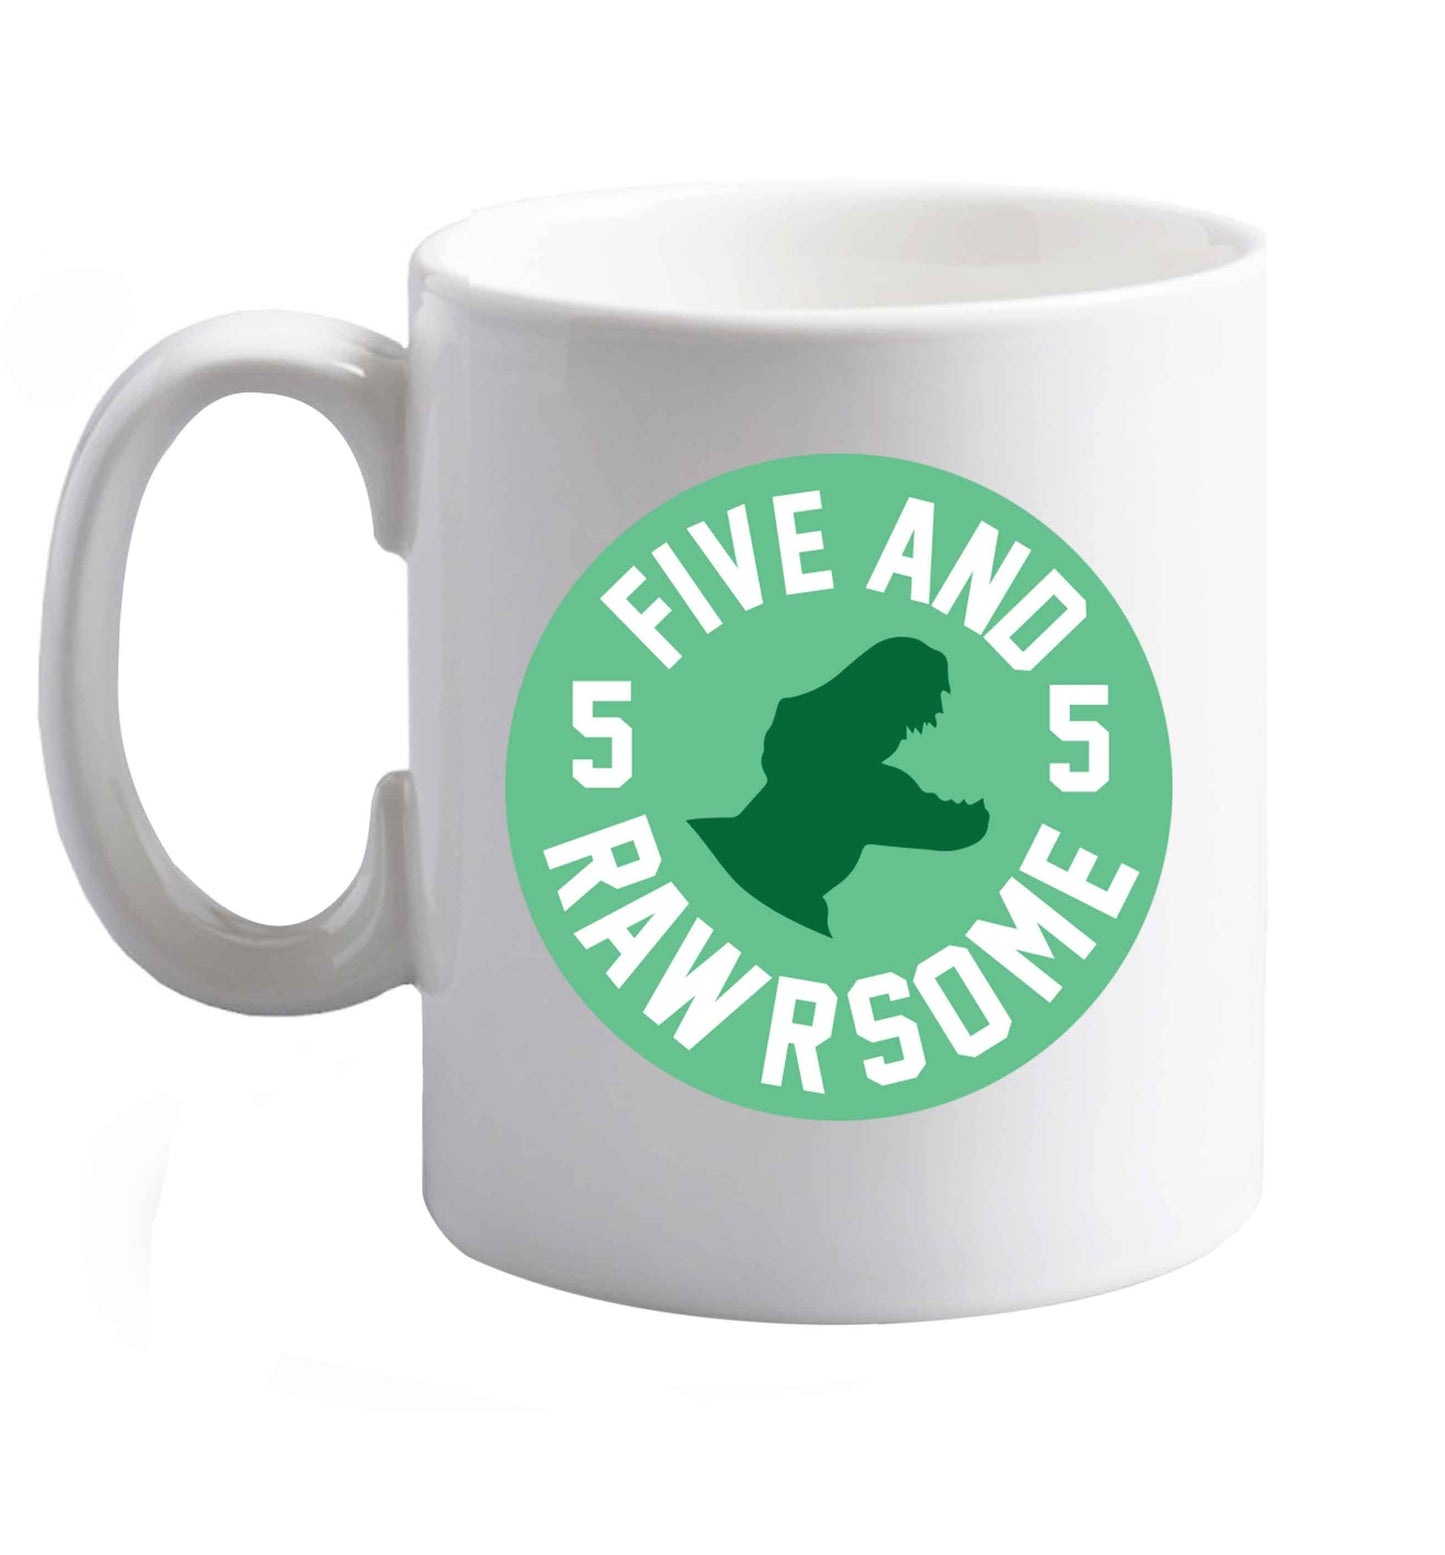 10 oz Five and rawrsome ceramic mug right handed